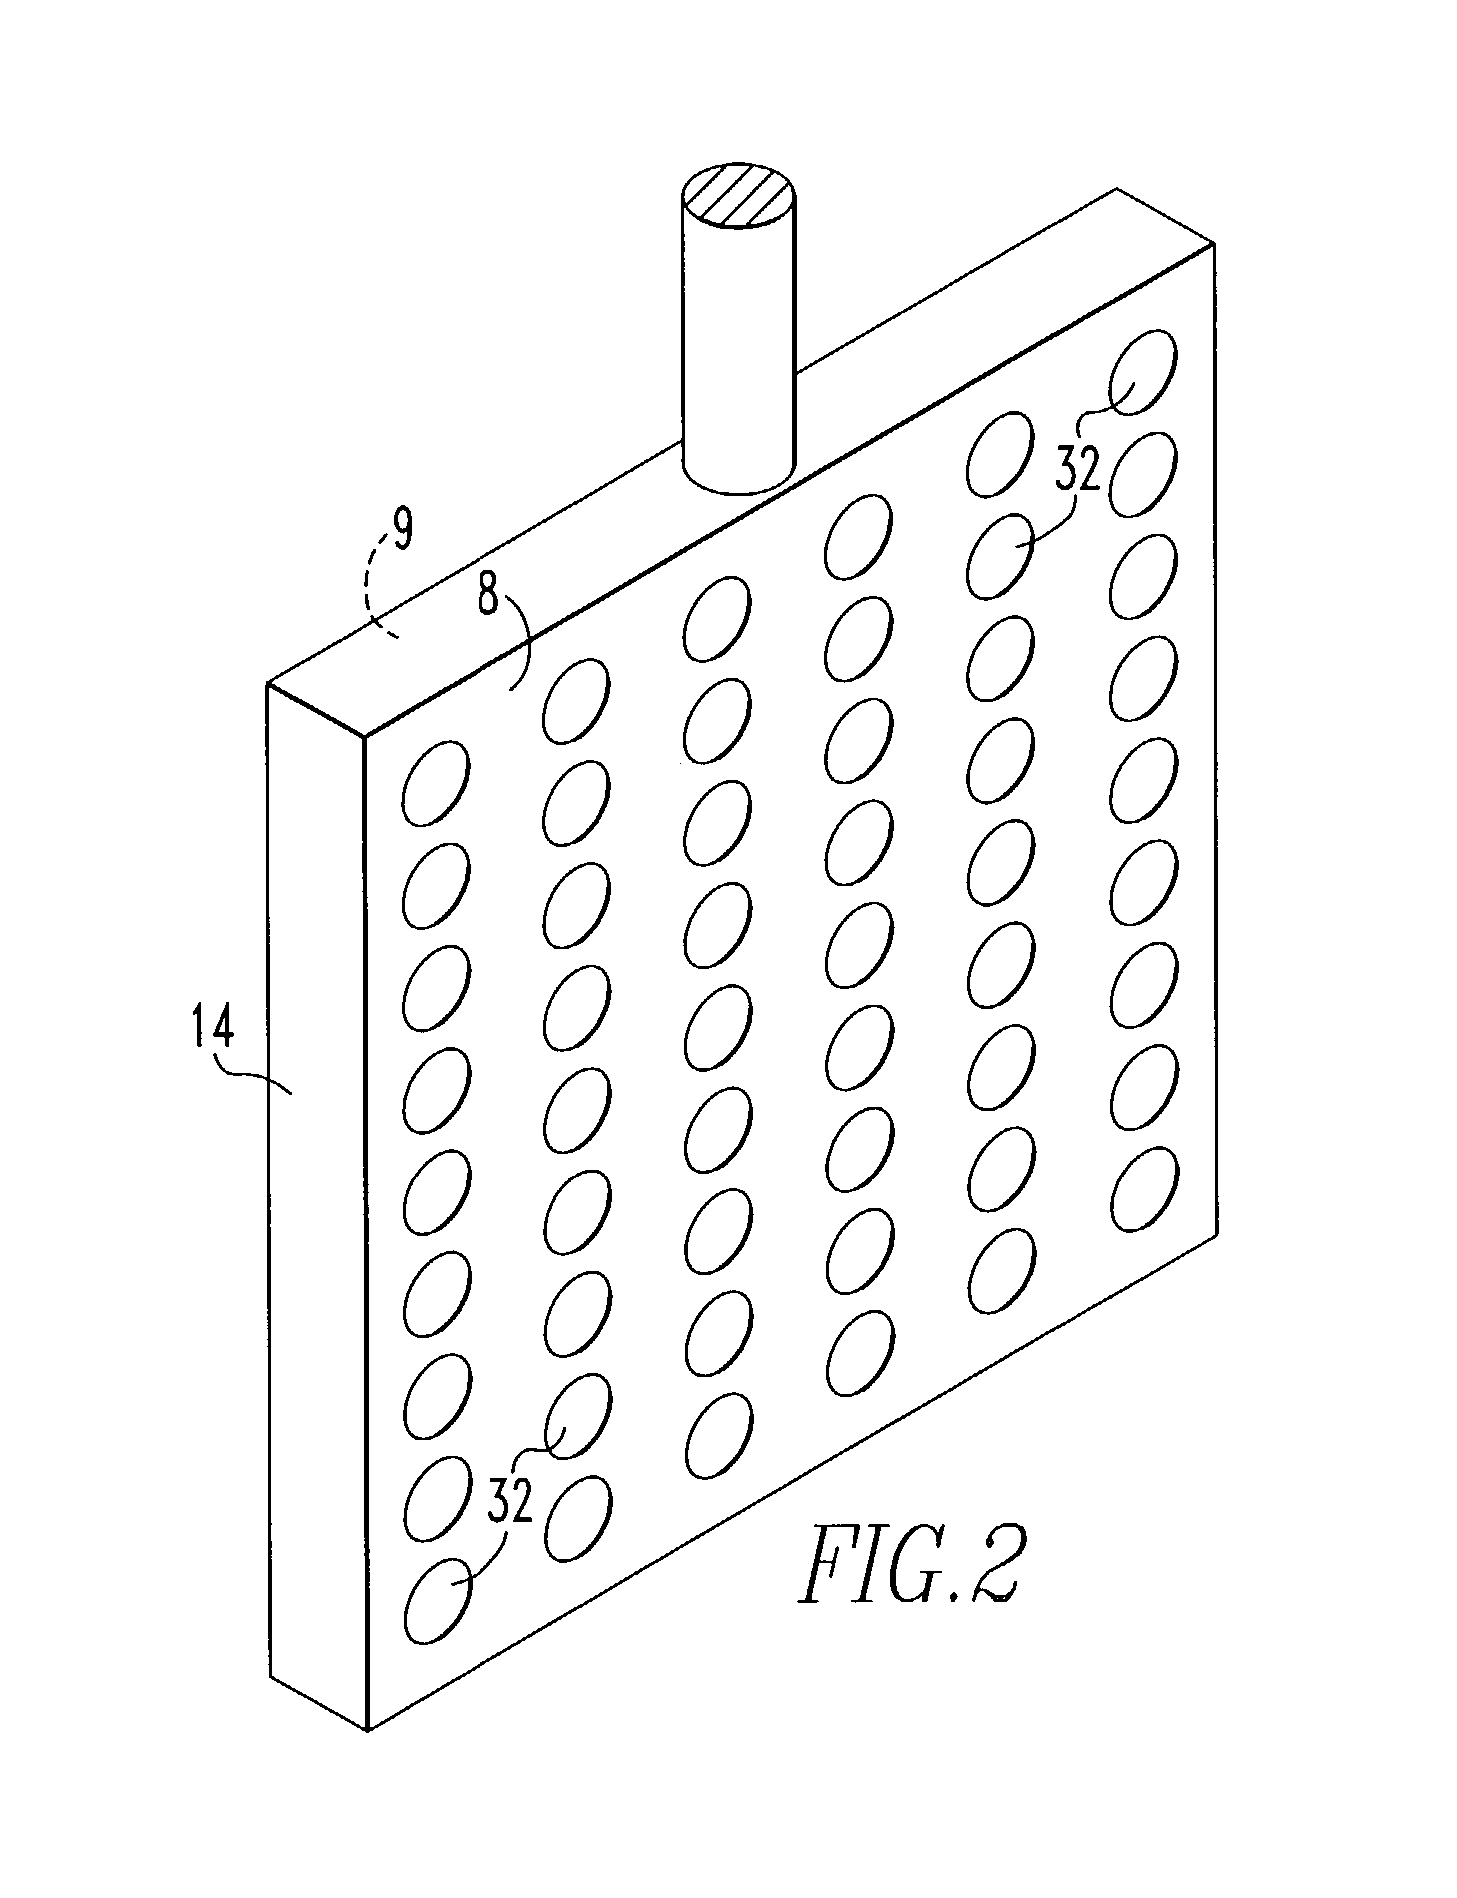 Cu-Ni-Fe anode for use in aluminum producing electrolytic cell